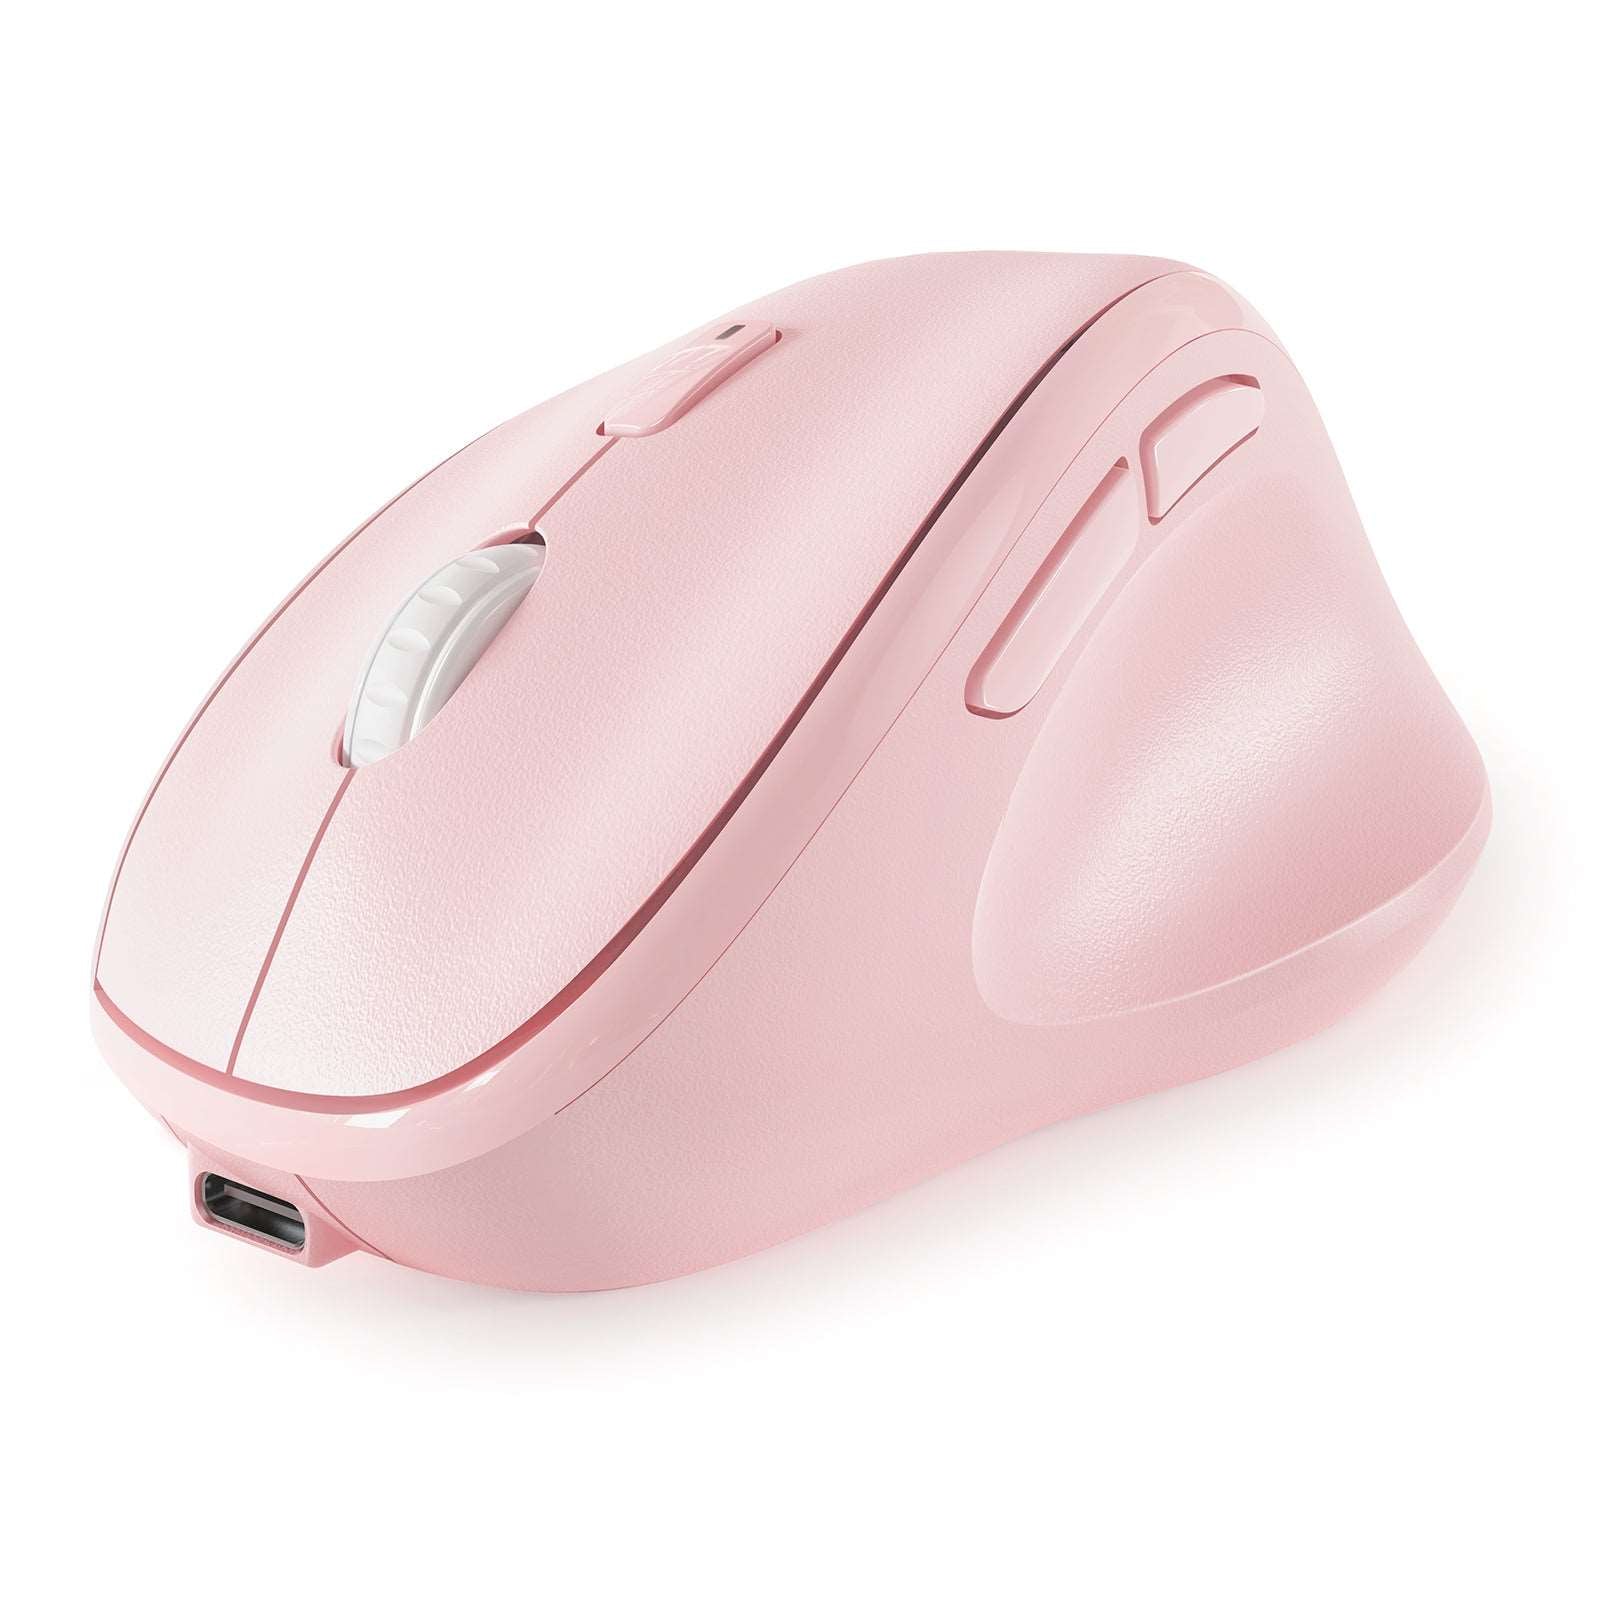 Rechargeable Ergonomic Vertical 3-Mode Wireless Mouse MP-V01B